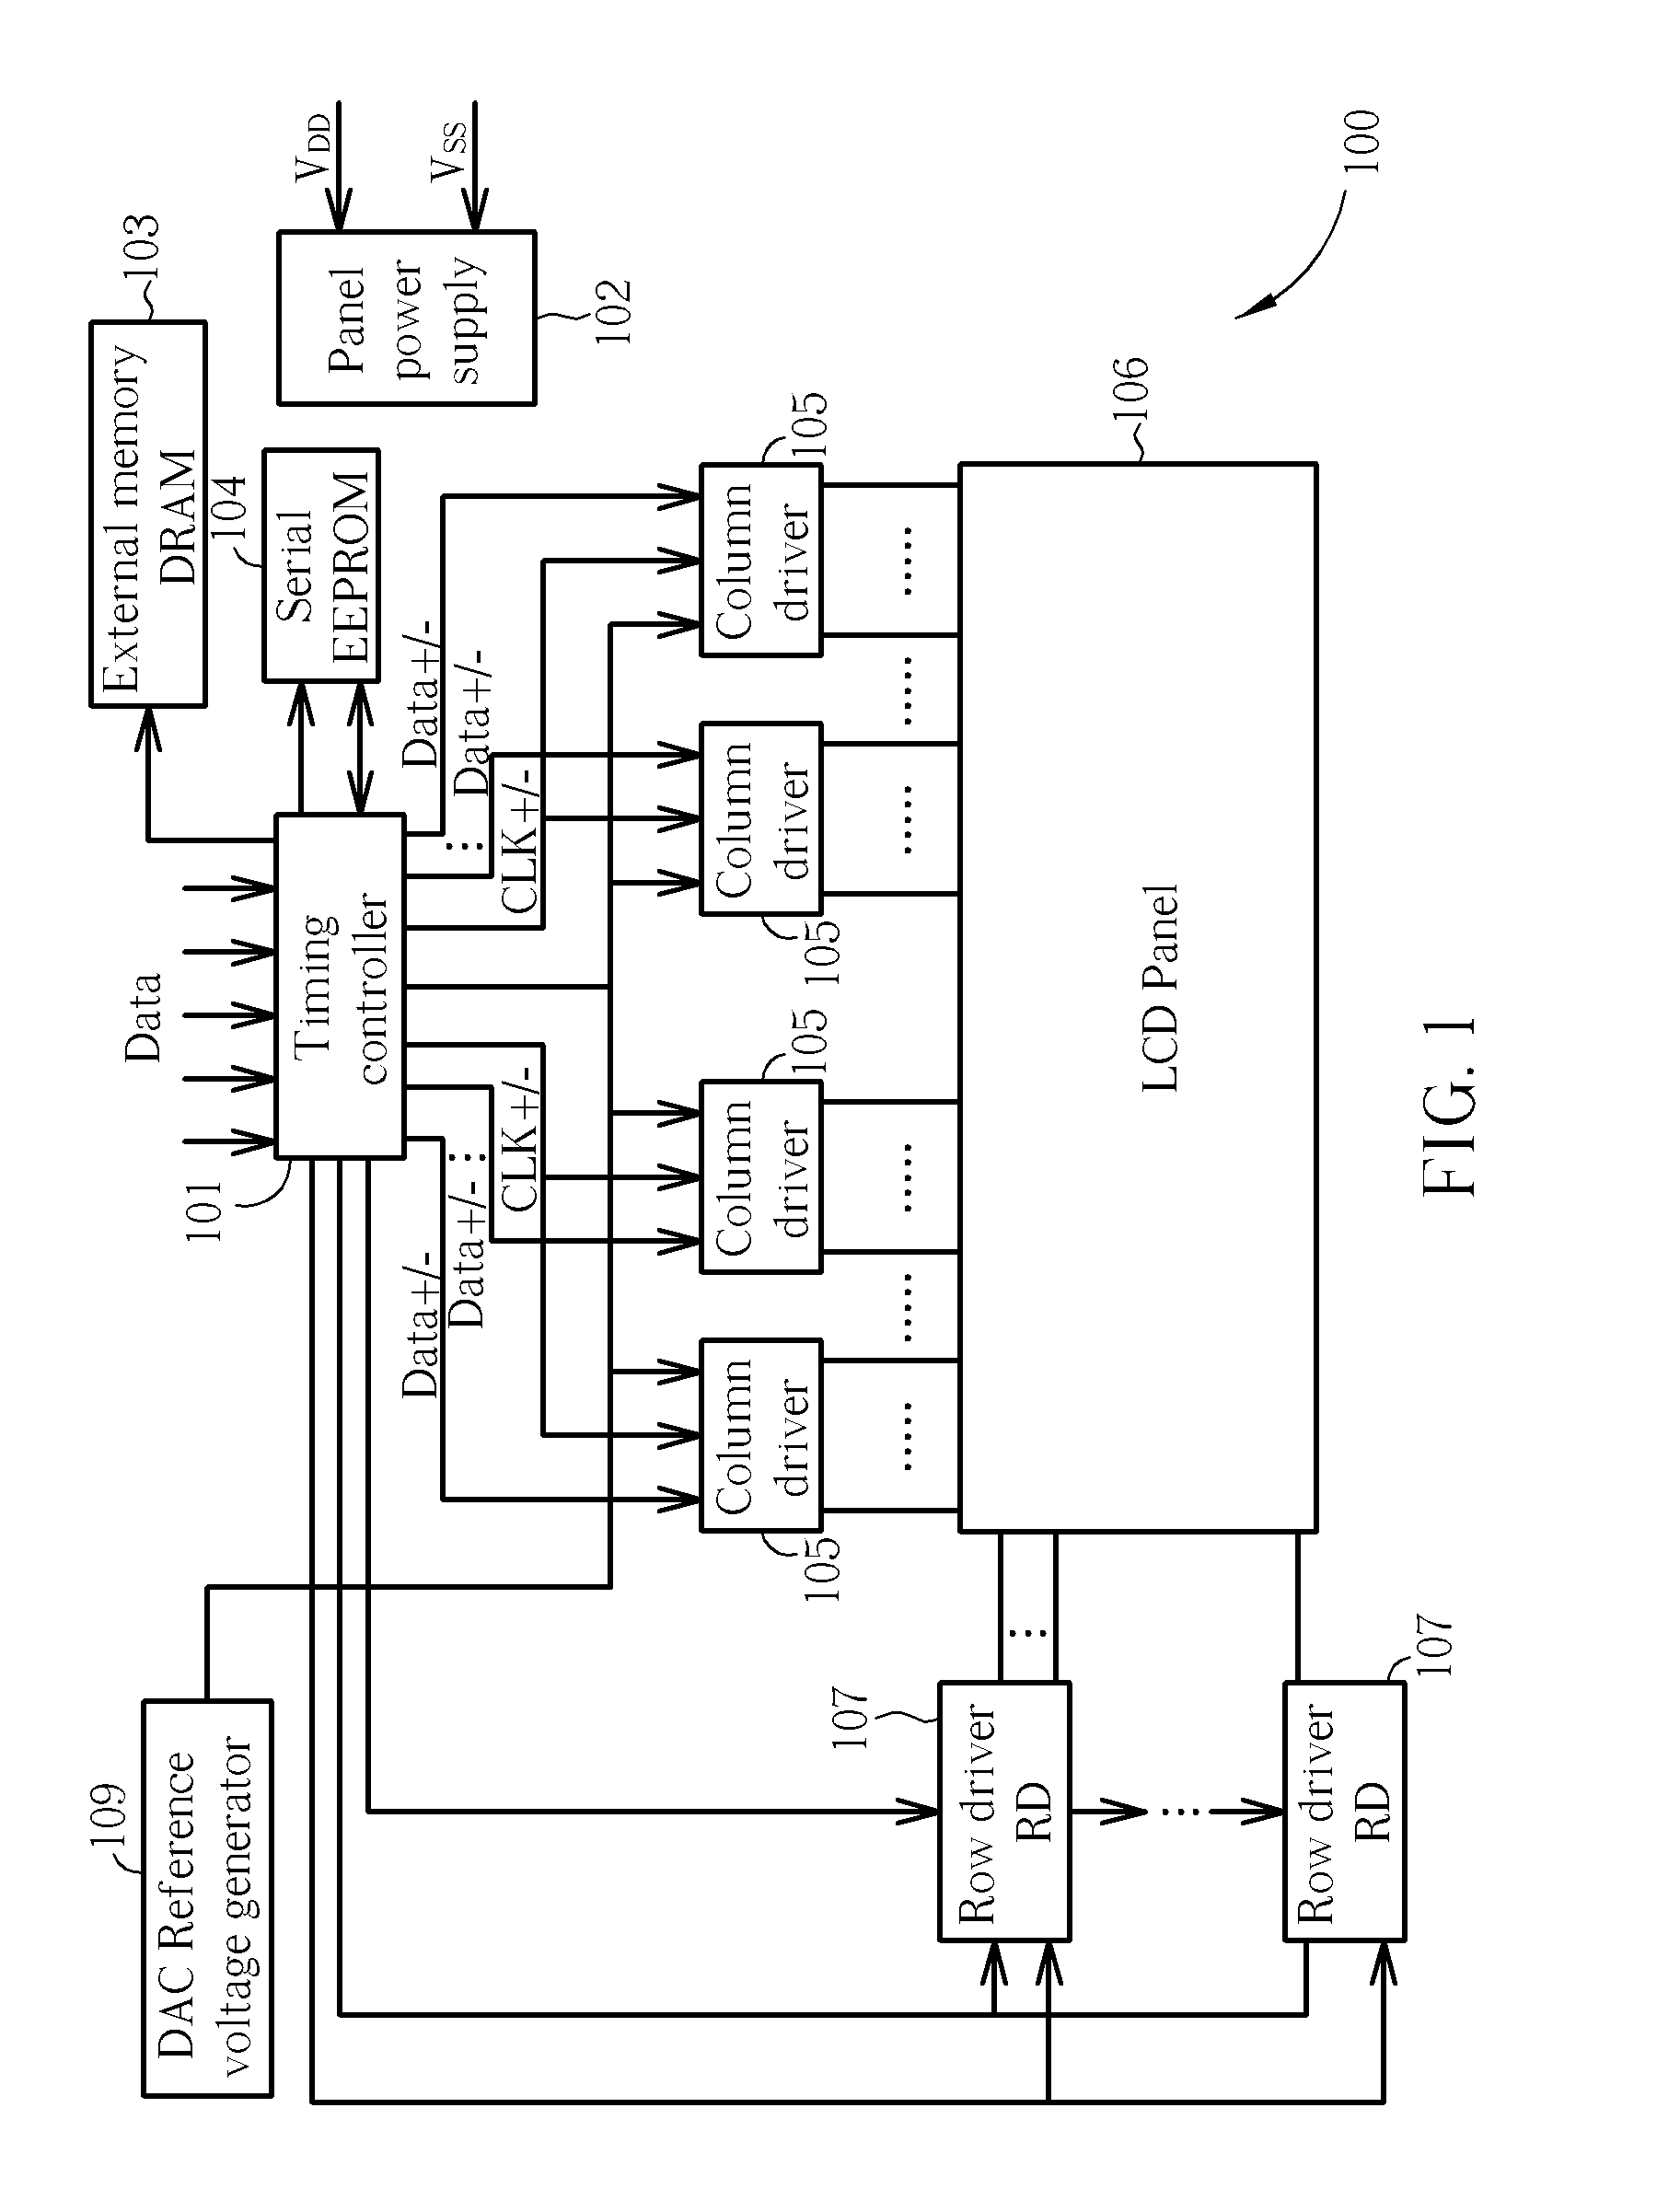 Programmable nonvolatile memory embedded in a timing controller for storing lookup tables